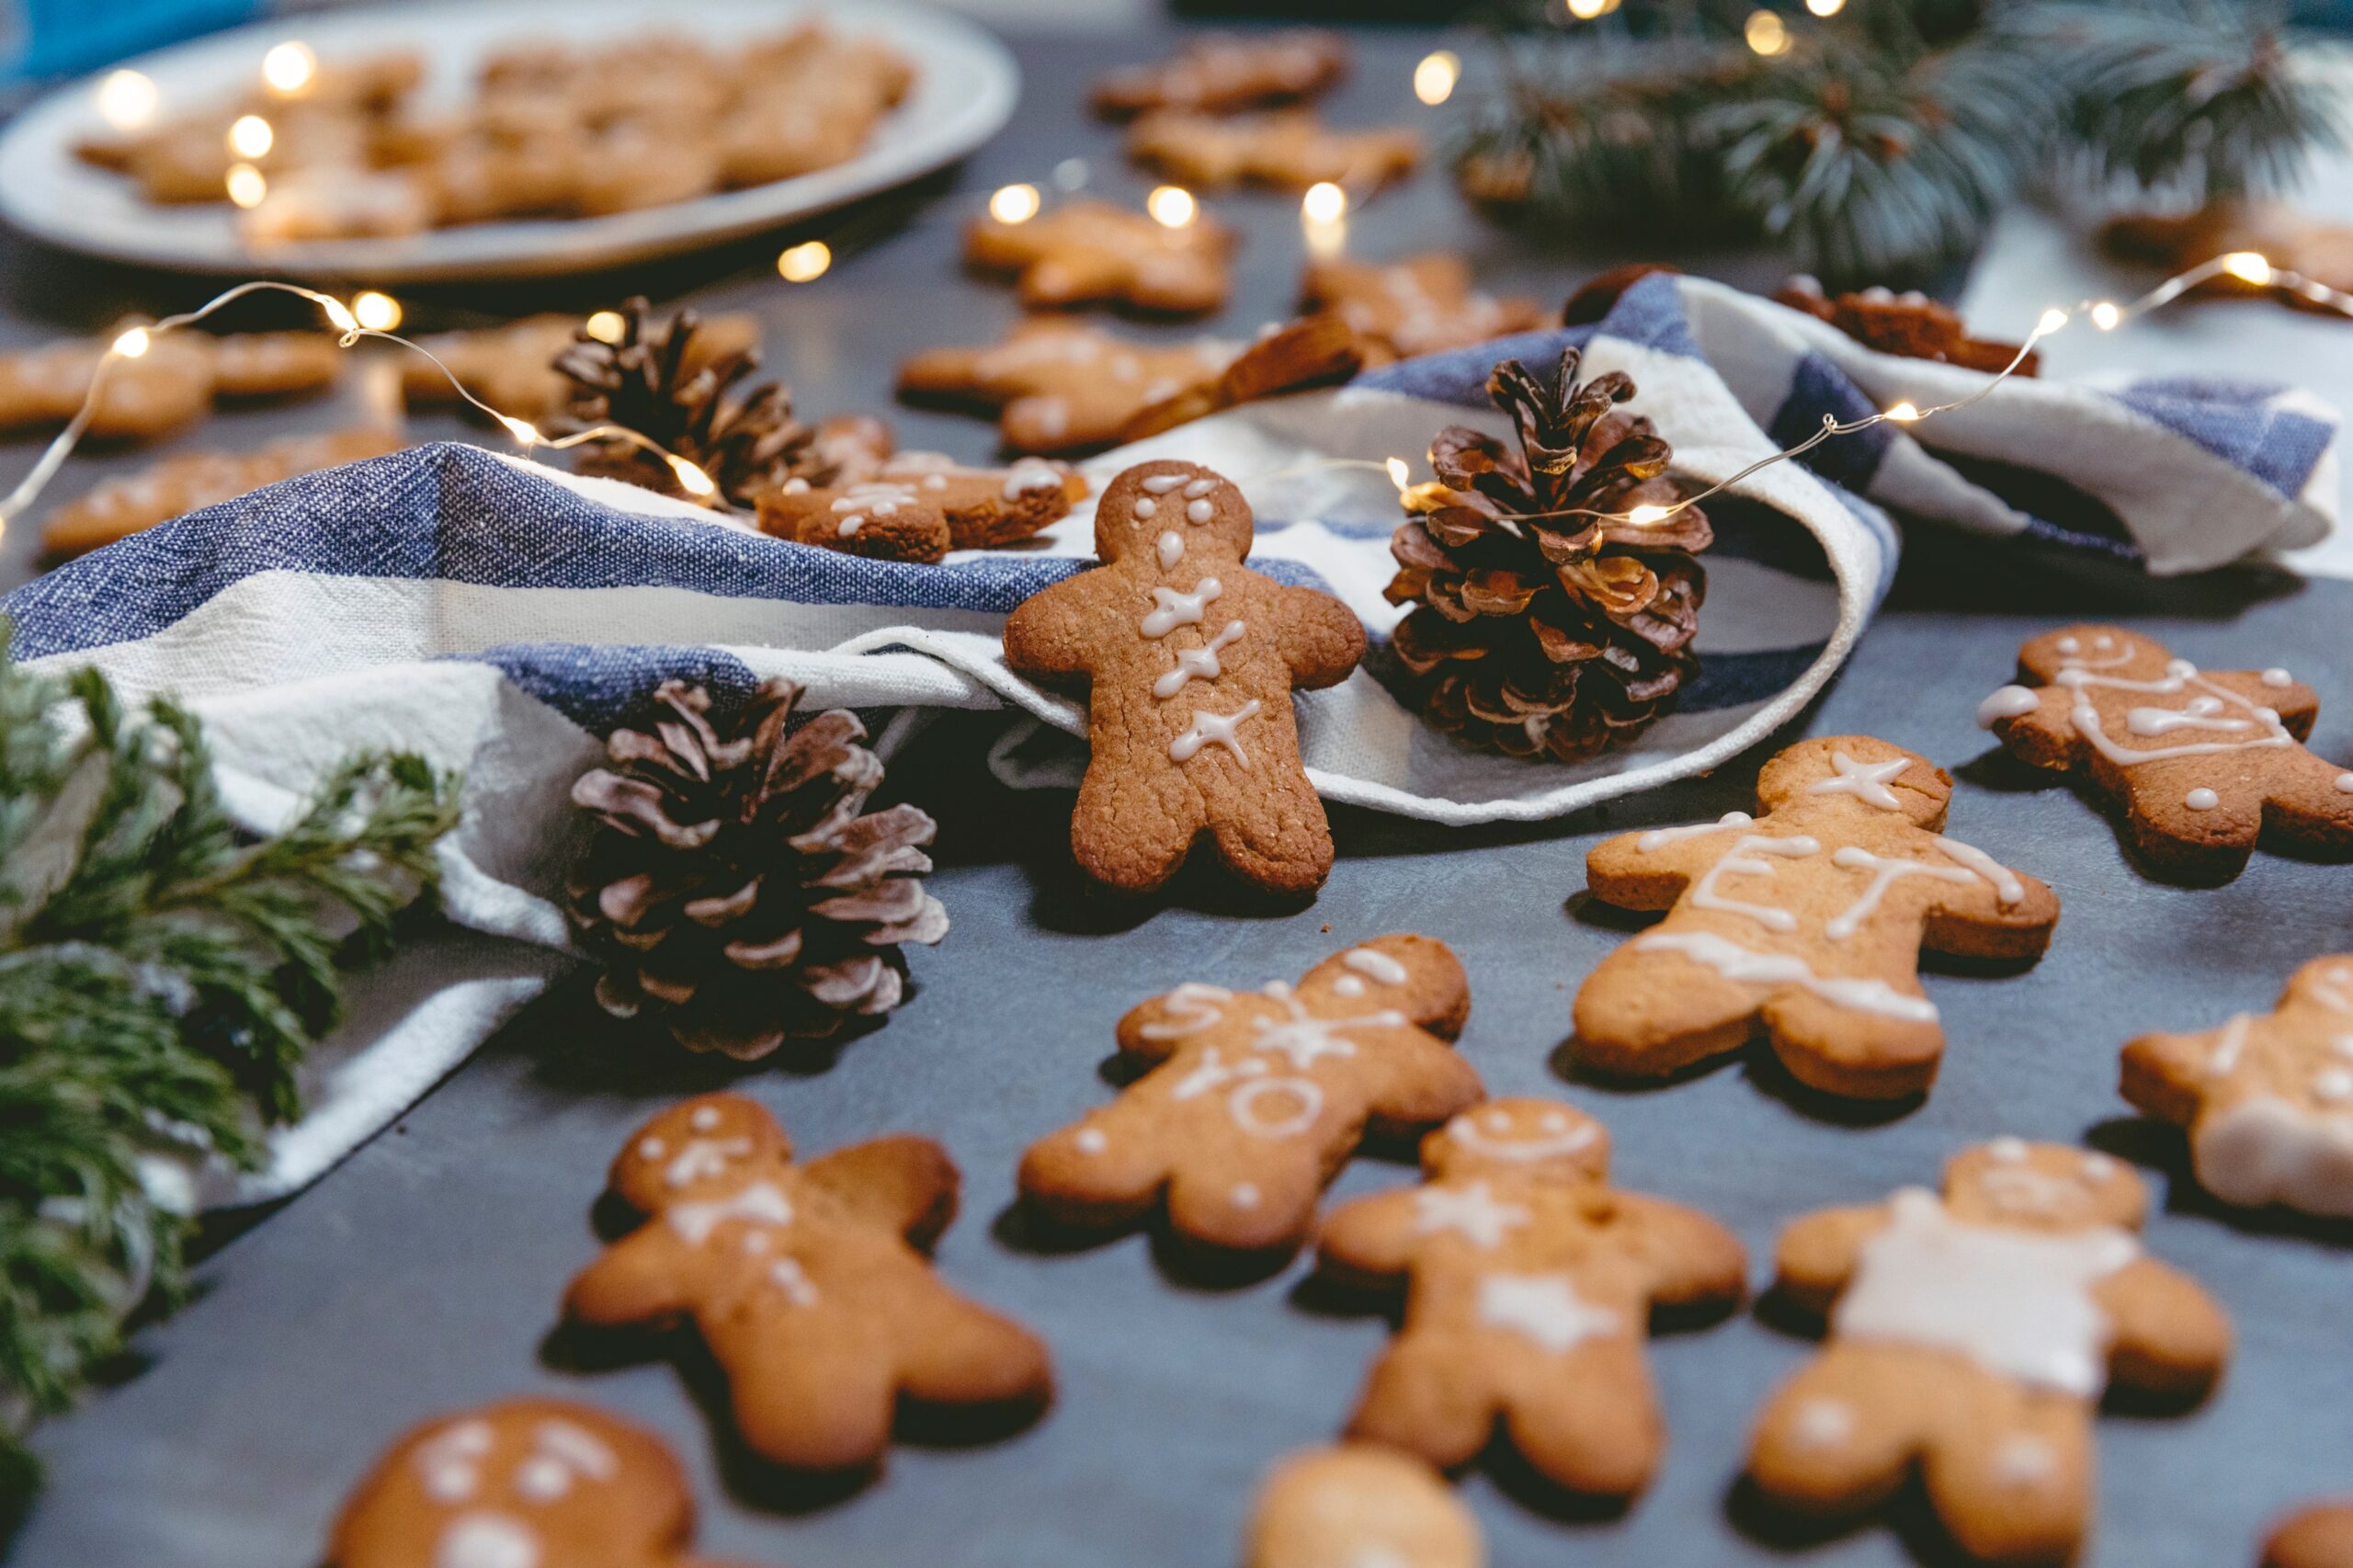 Christmas themed potlucks are perfect for the upcoming holiday season. Pictured: Gingerbread cookies.